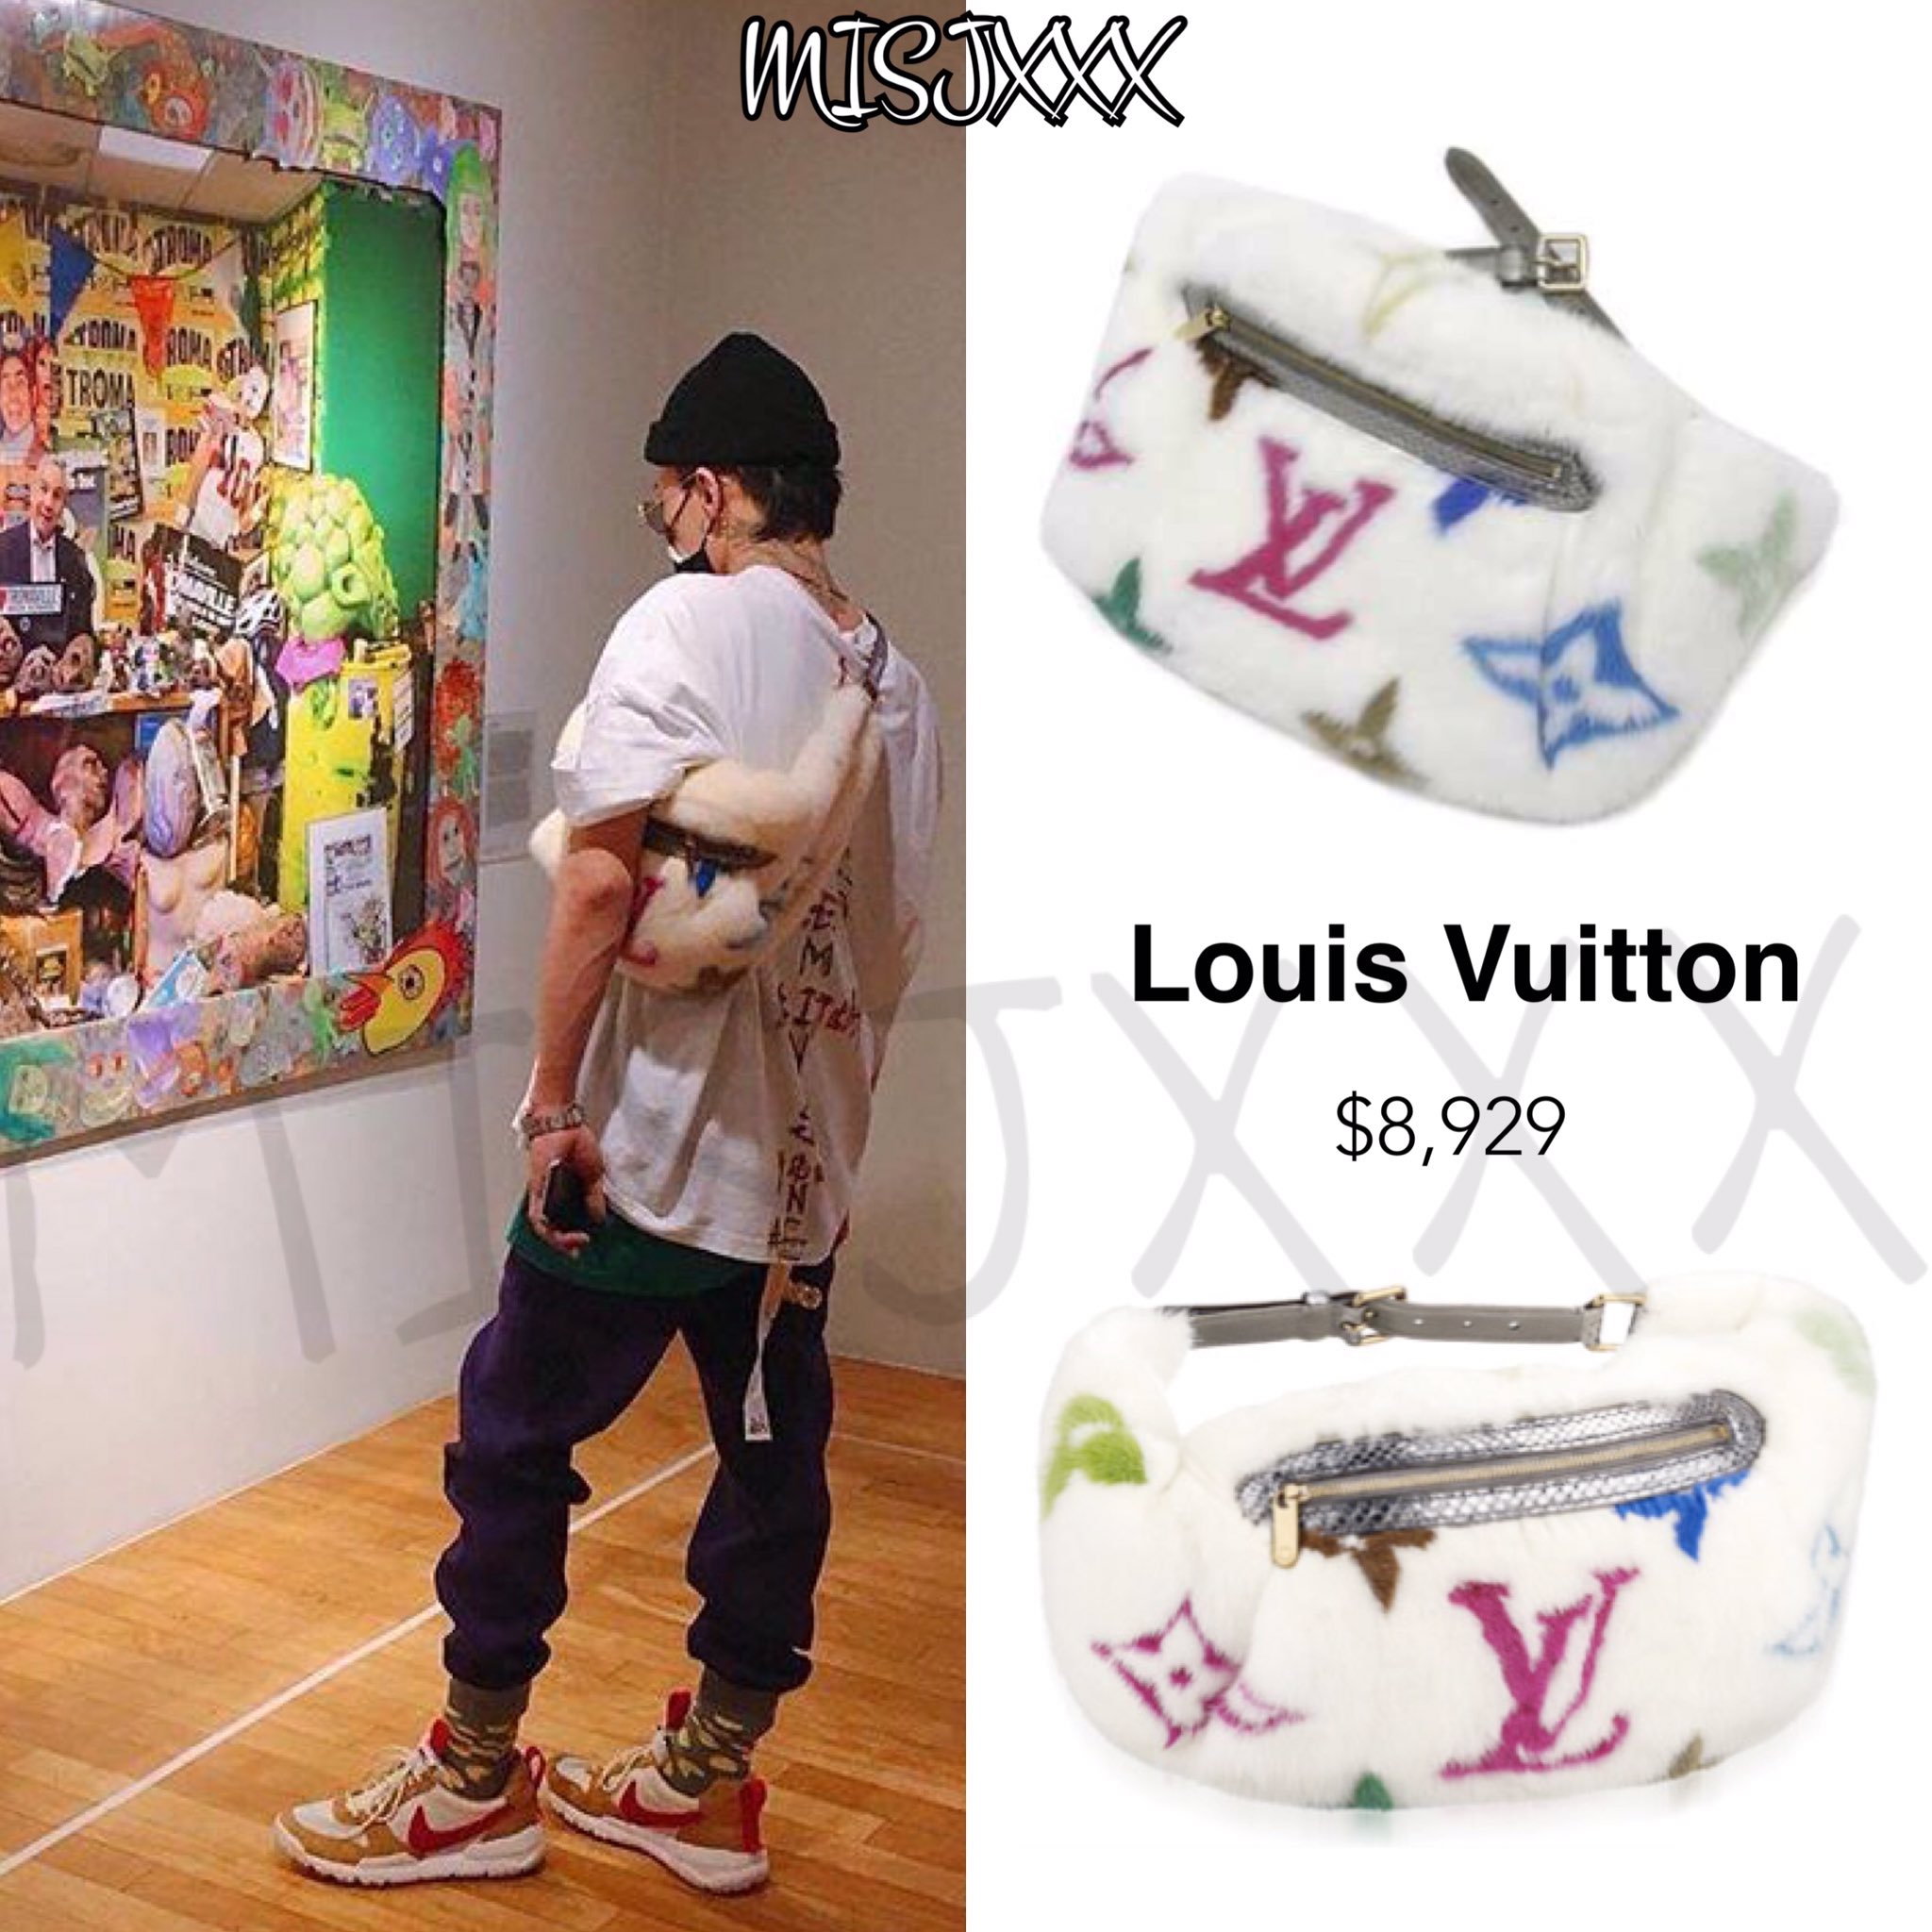 GDSTYLE on X: #GDStyle 👉#LOUISVUITTON limited edition rare mink